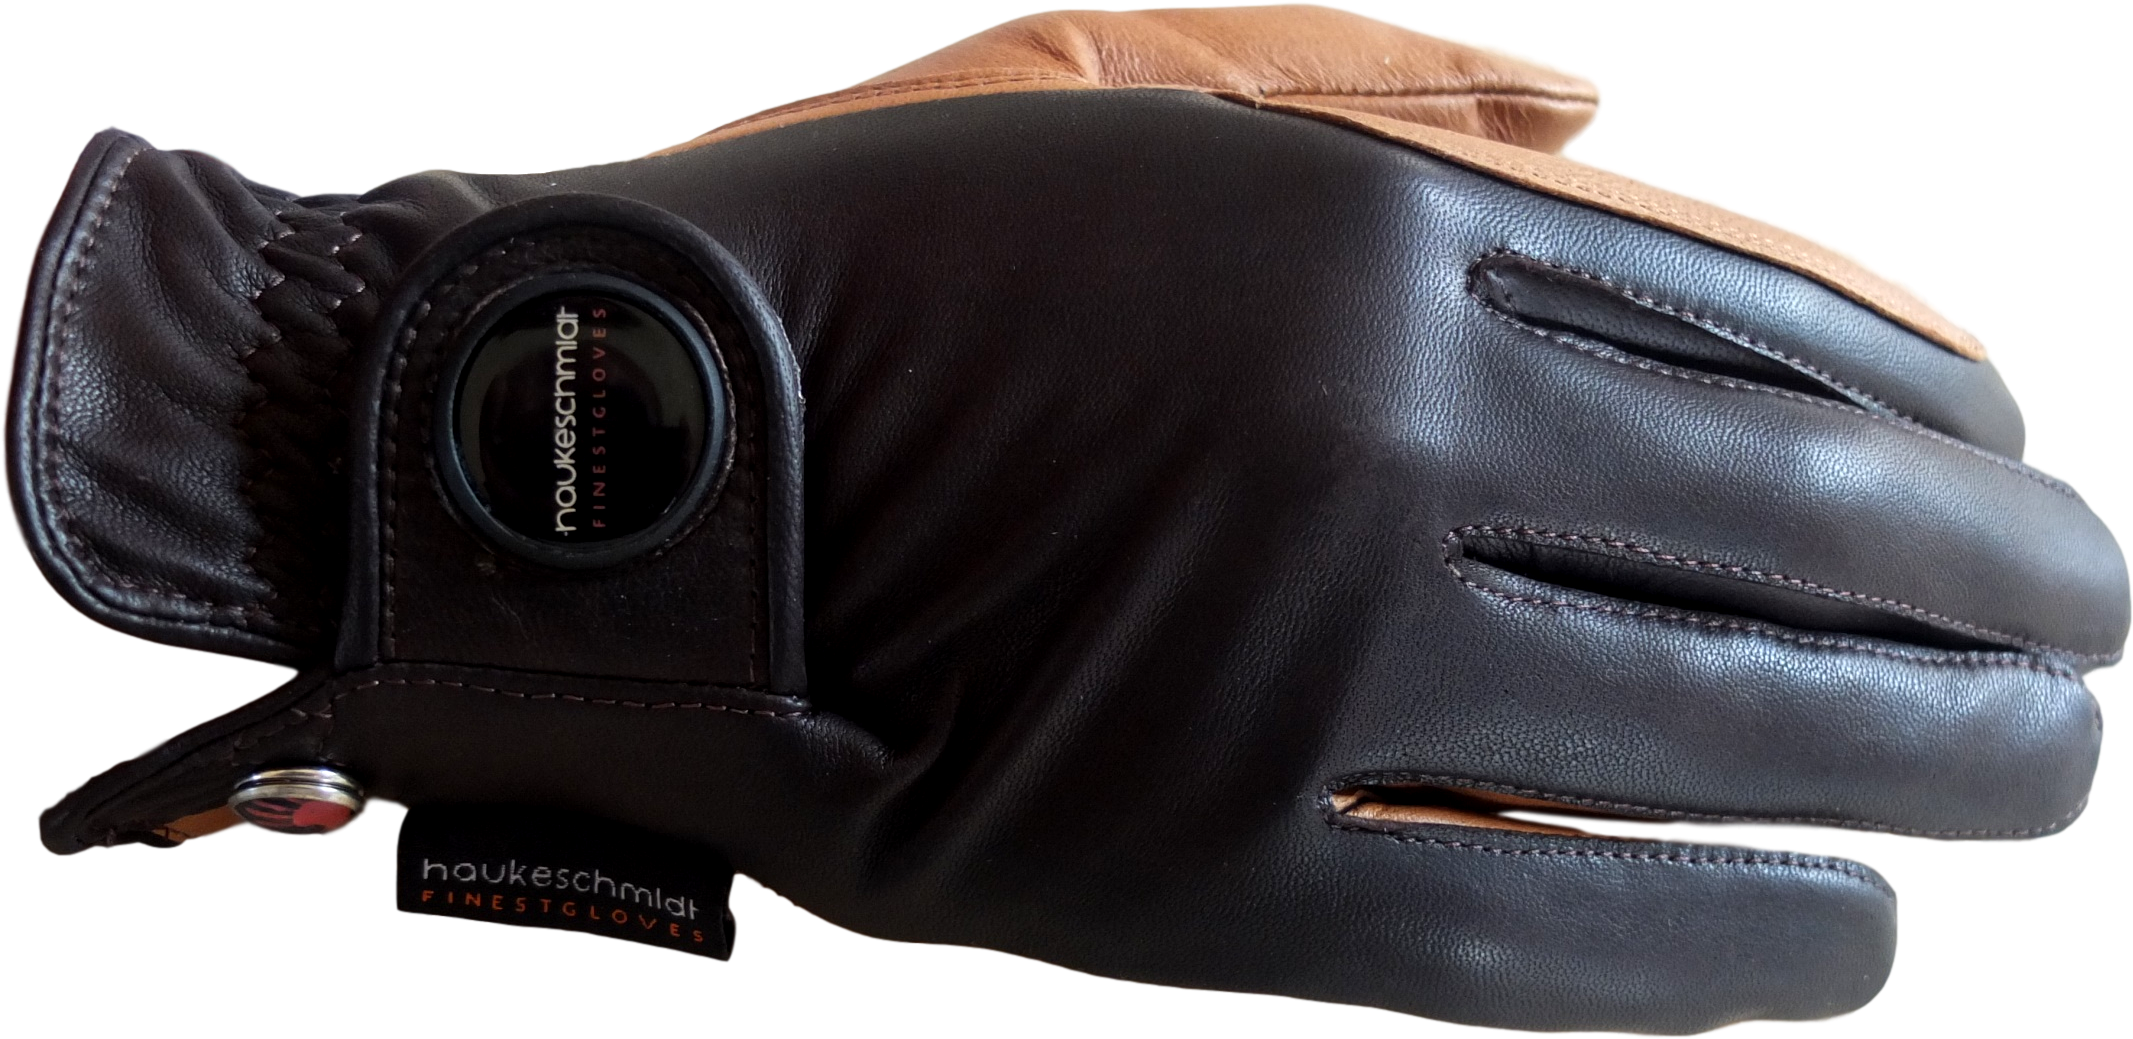 One Of Our Most Durable Gloves The Ladies Finest Leather - Hauke Schmidt Ladies Finest Riding Gloves - Mocha/light (2365x1513)